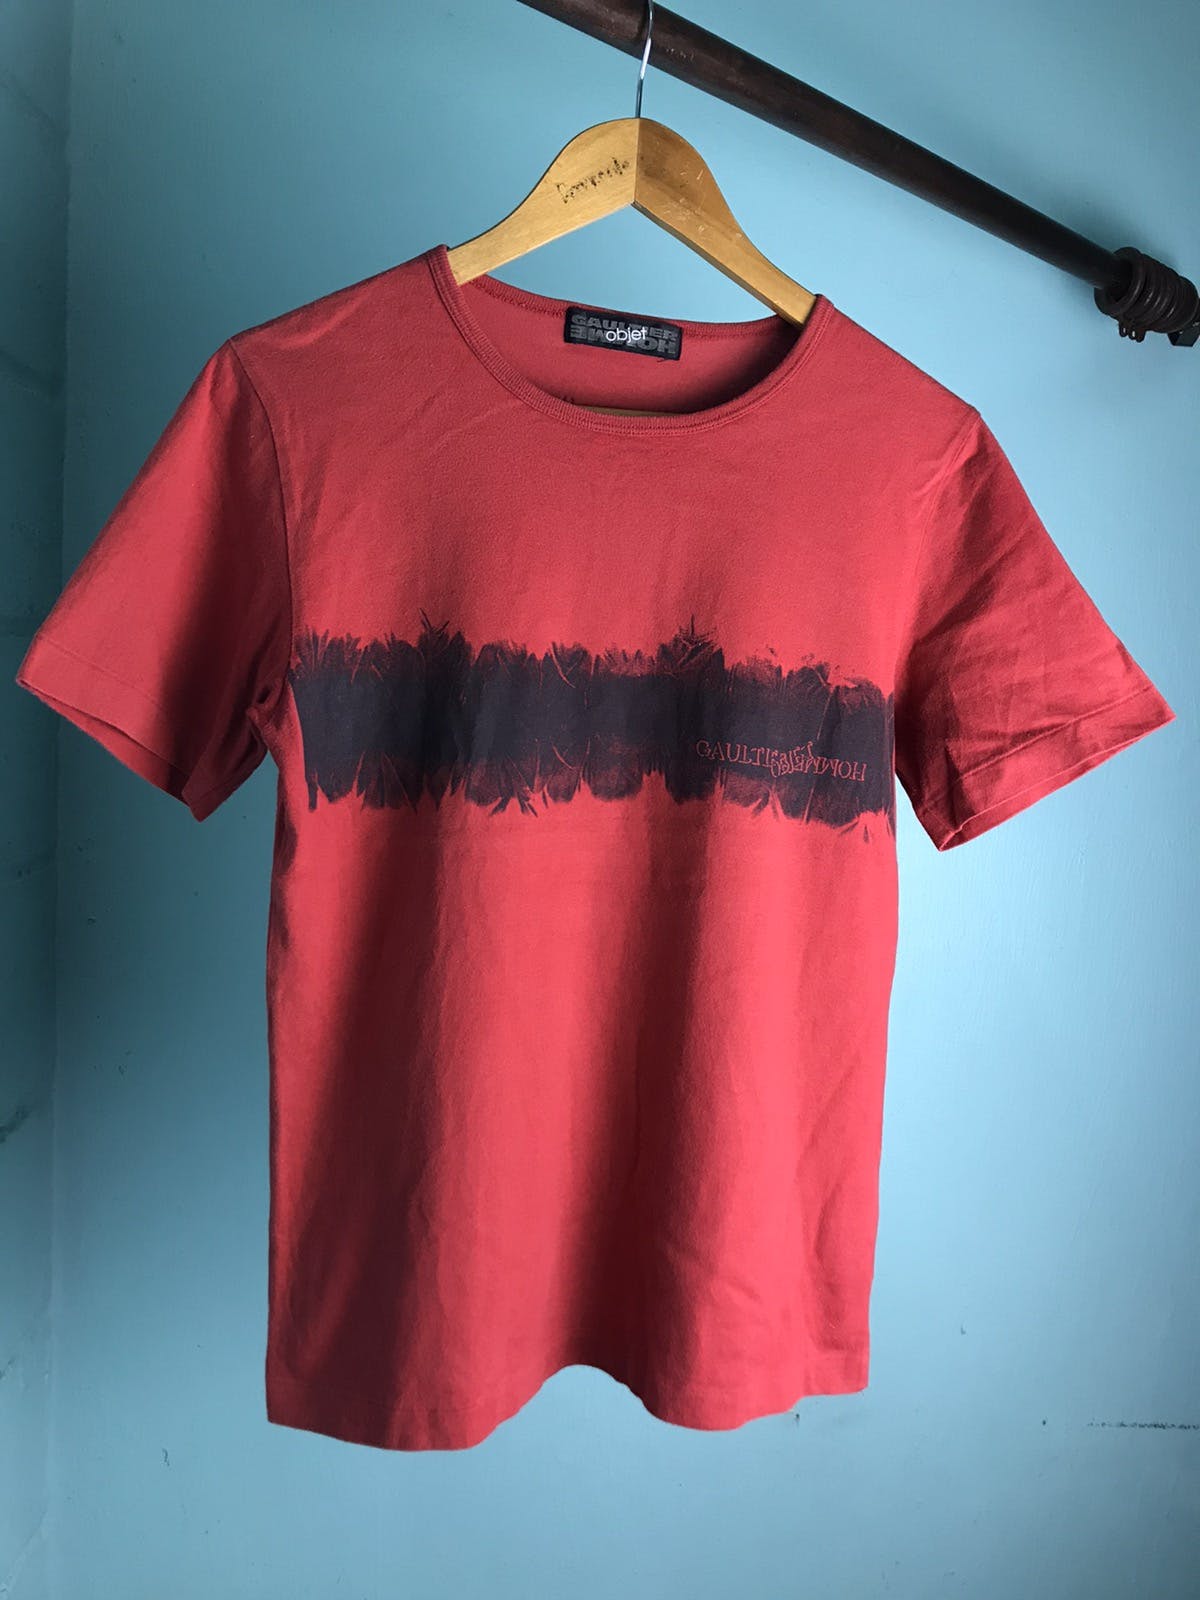 Vintage Gaultier Homme Object tee - 4